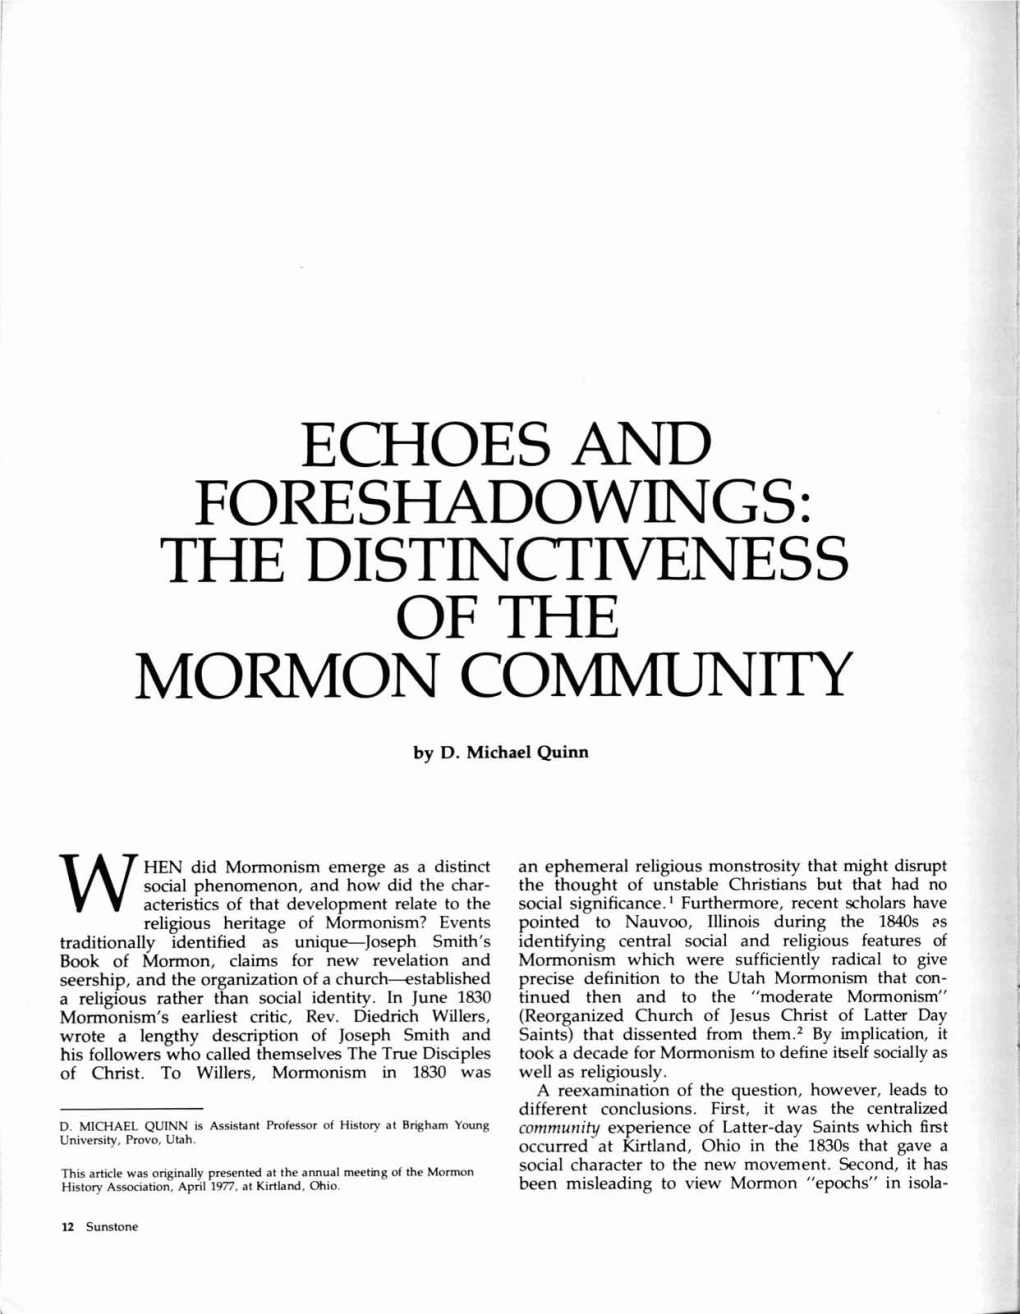 Echoes and Foreshadowings: 'The Distinctiveness of the Mormon Community